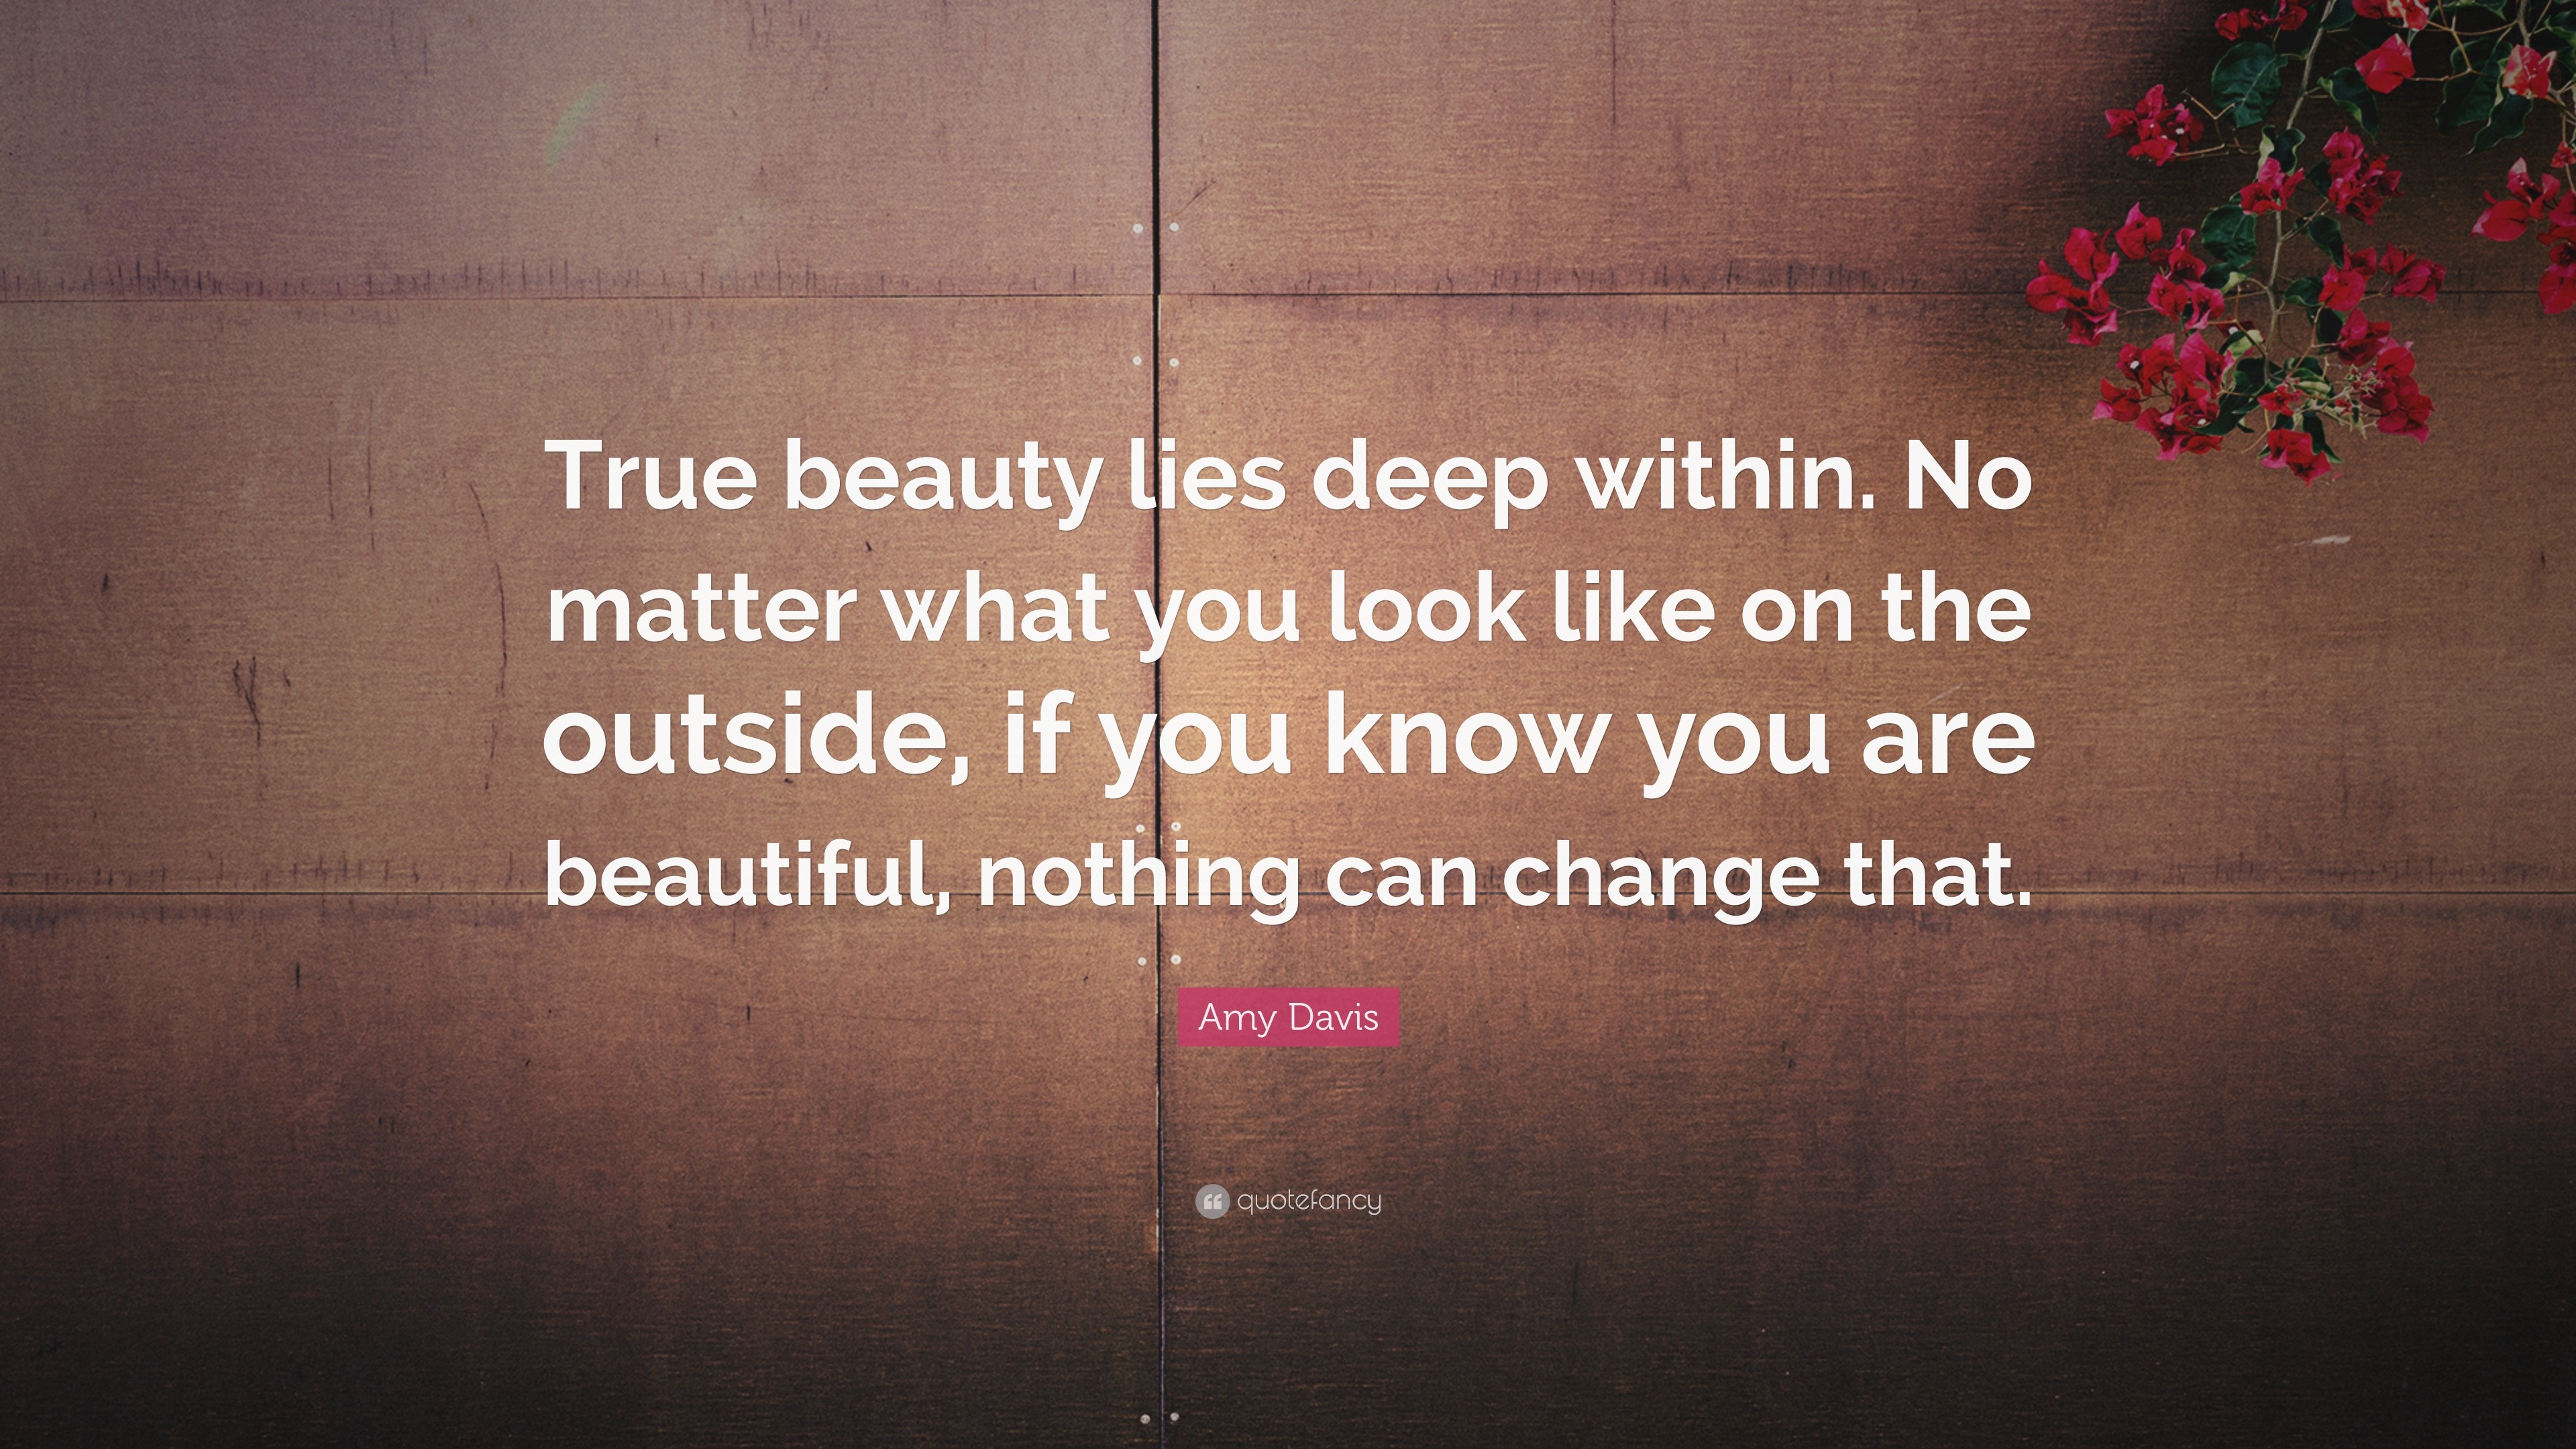 Amy Davis Quote “true Beauty Lies Deep Within No Matter What You Look